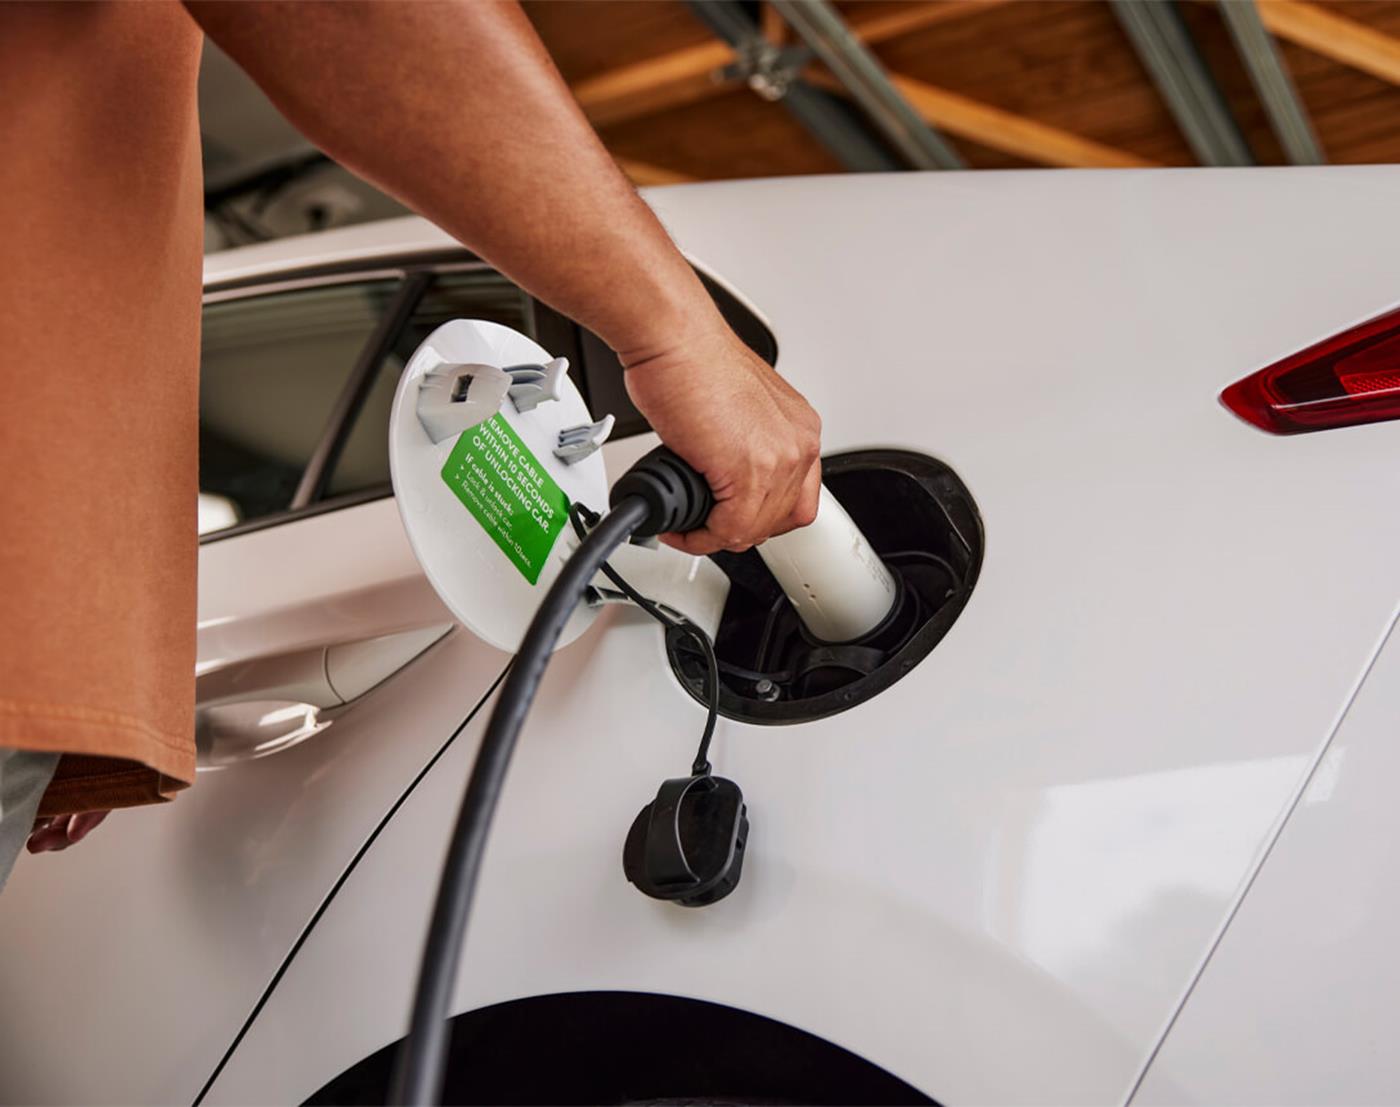 Plugging in electric vehicle